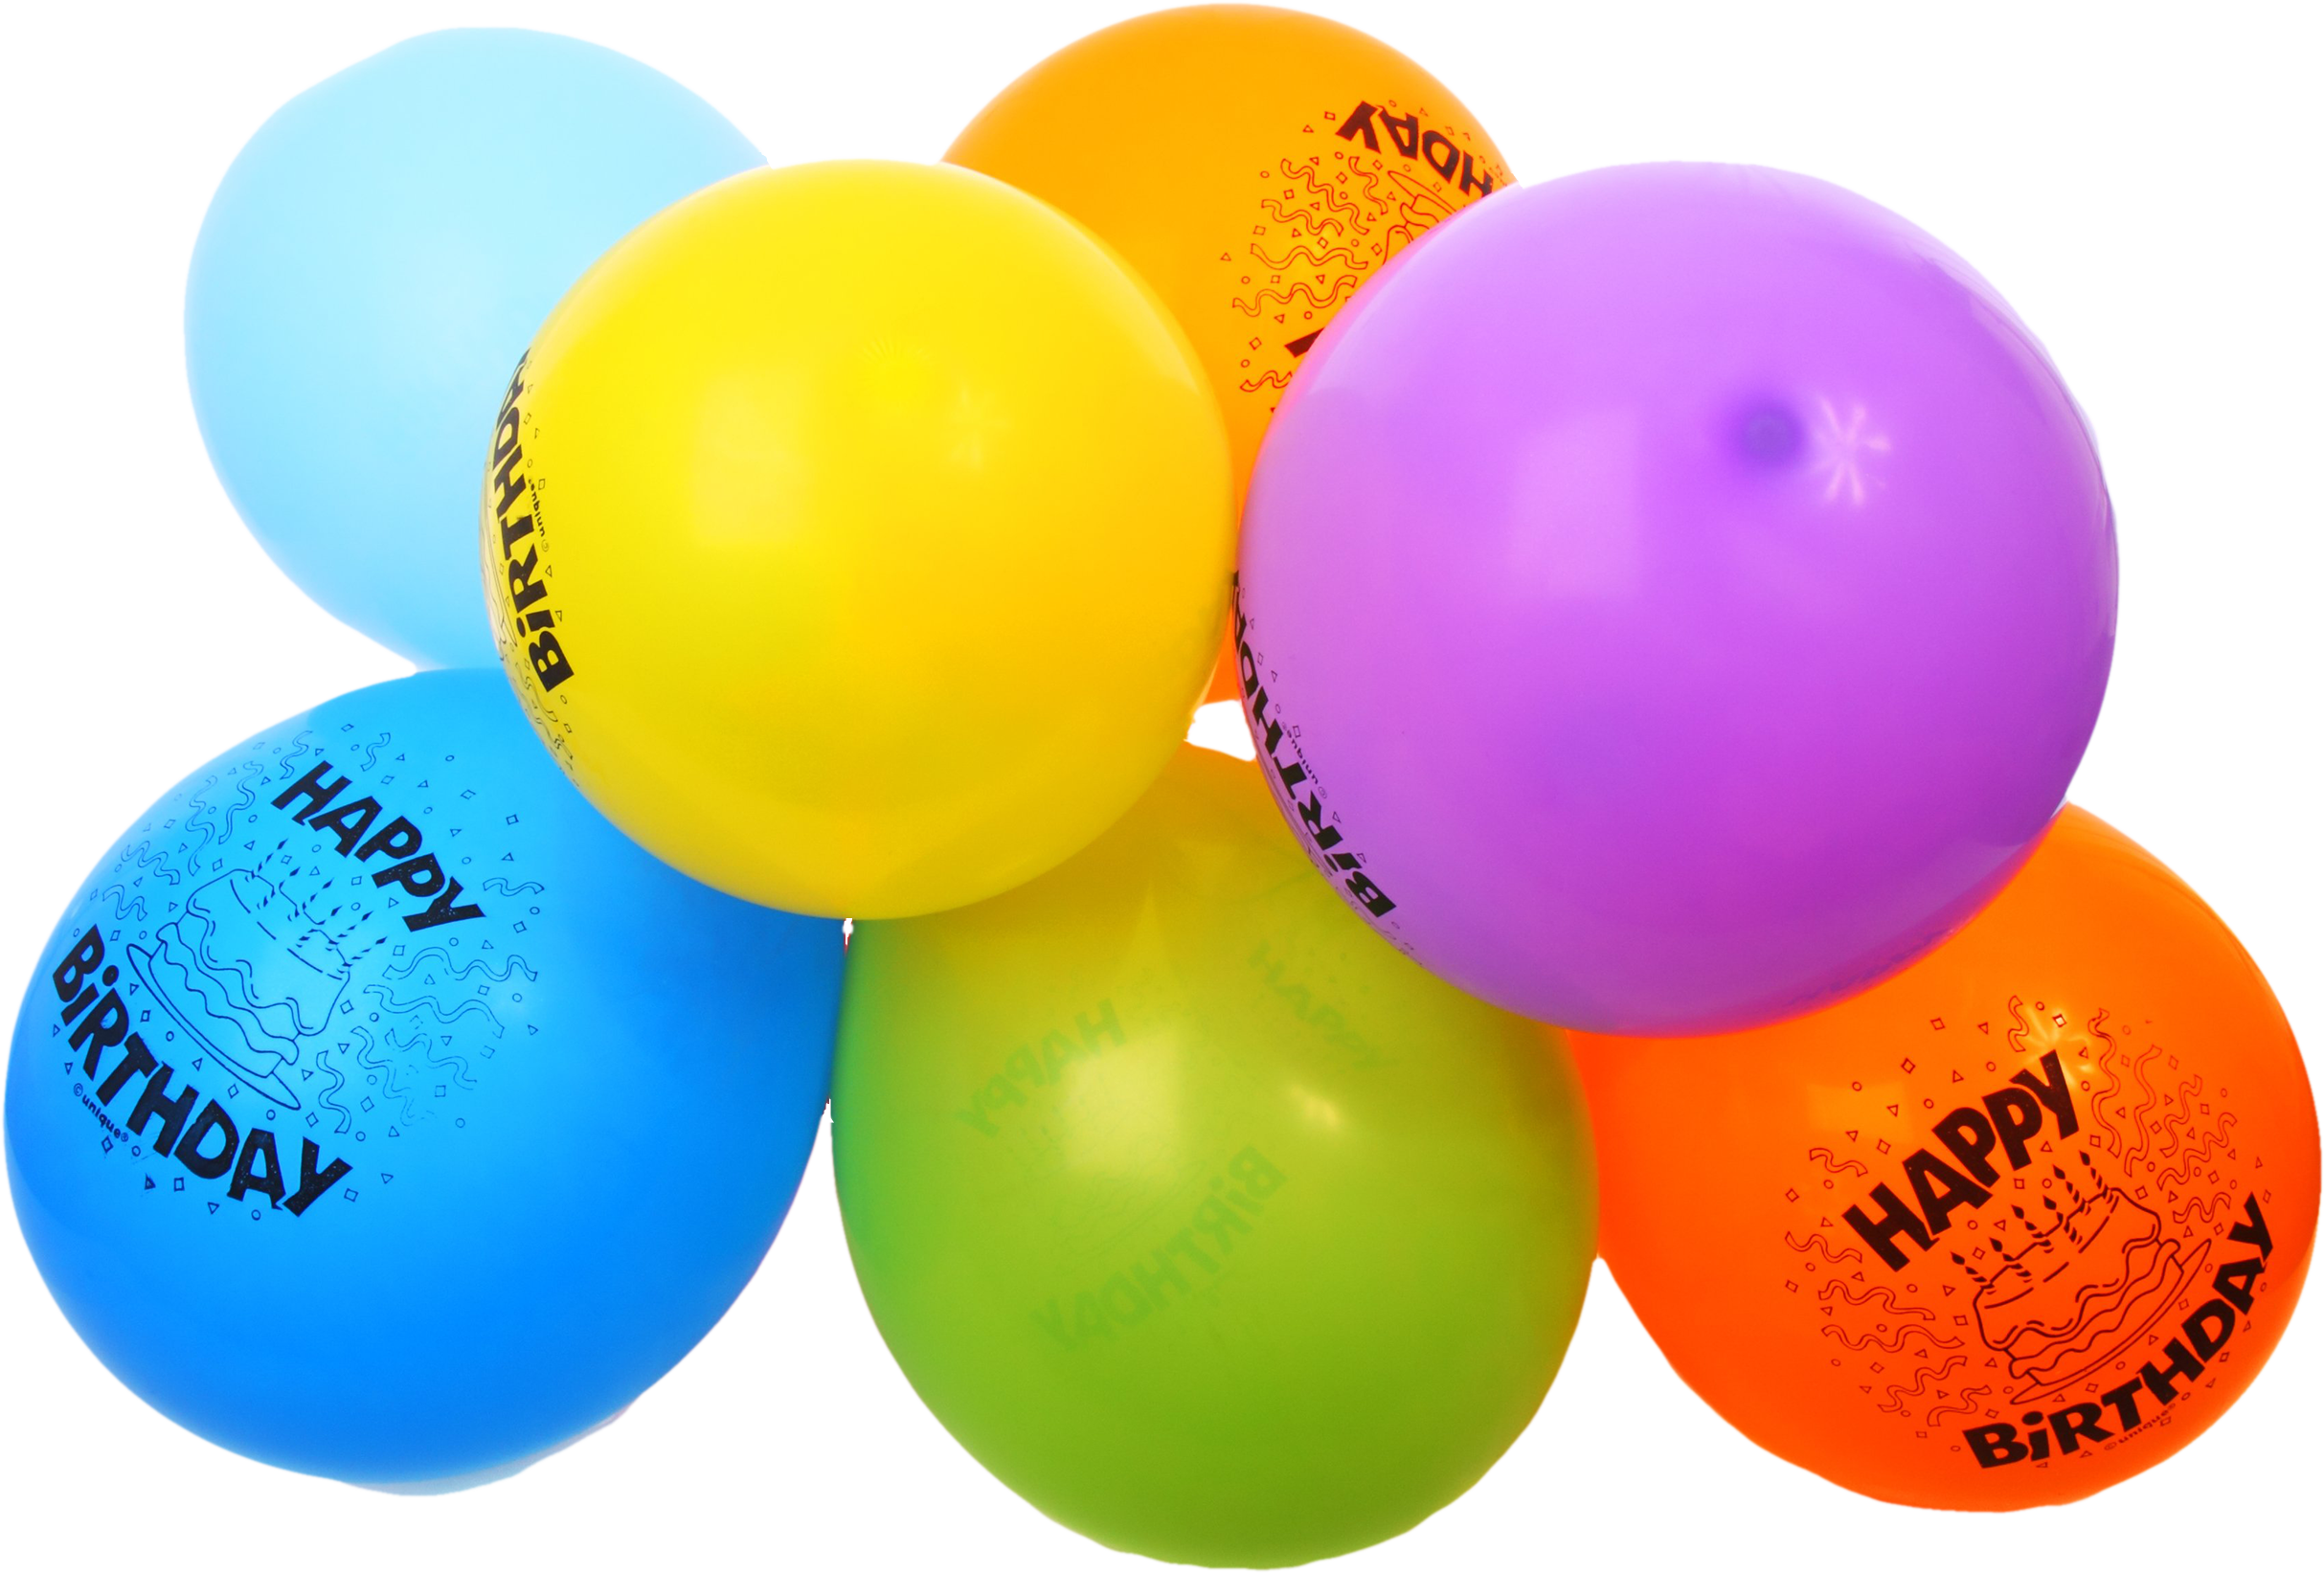 Happy Birthday Balloons Transparent PNG